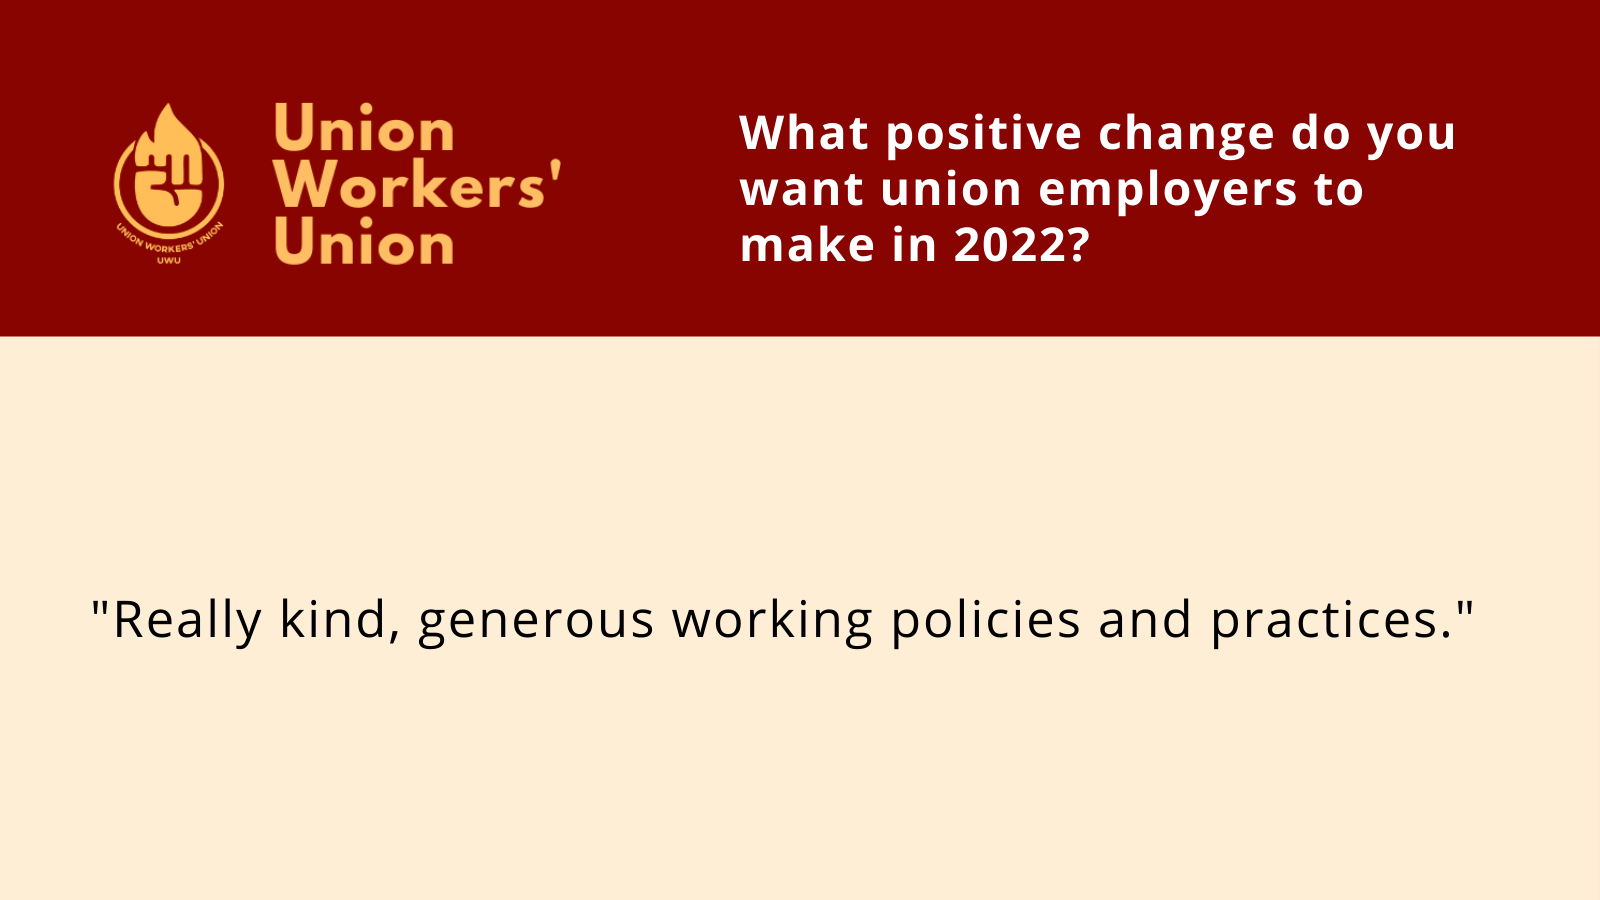 UWU logo next to question, what positive change do you want union employers to make in 2022? Member response: Really kind and generous working policies and practices